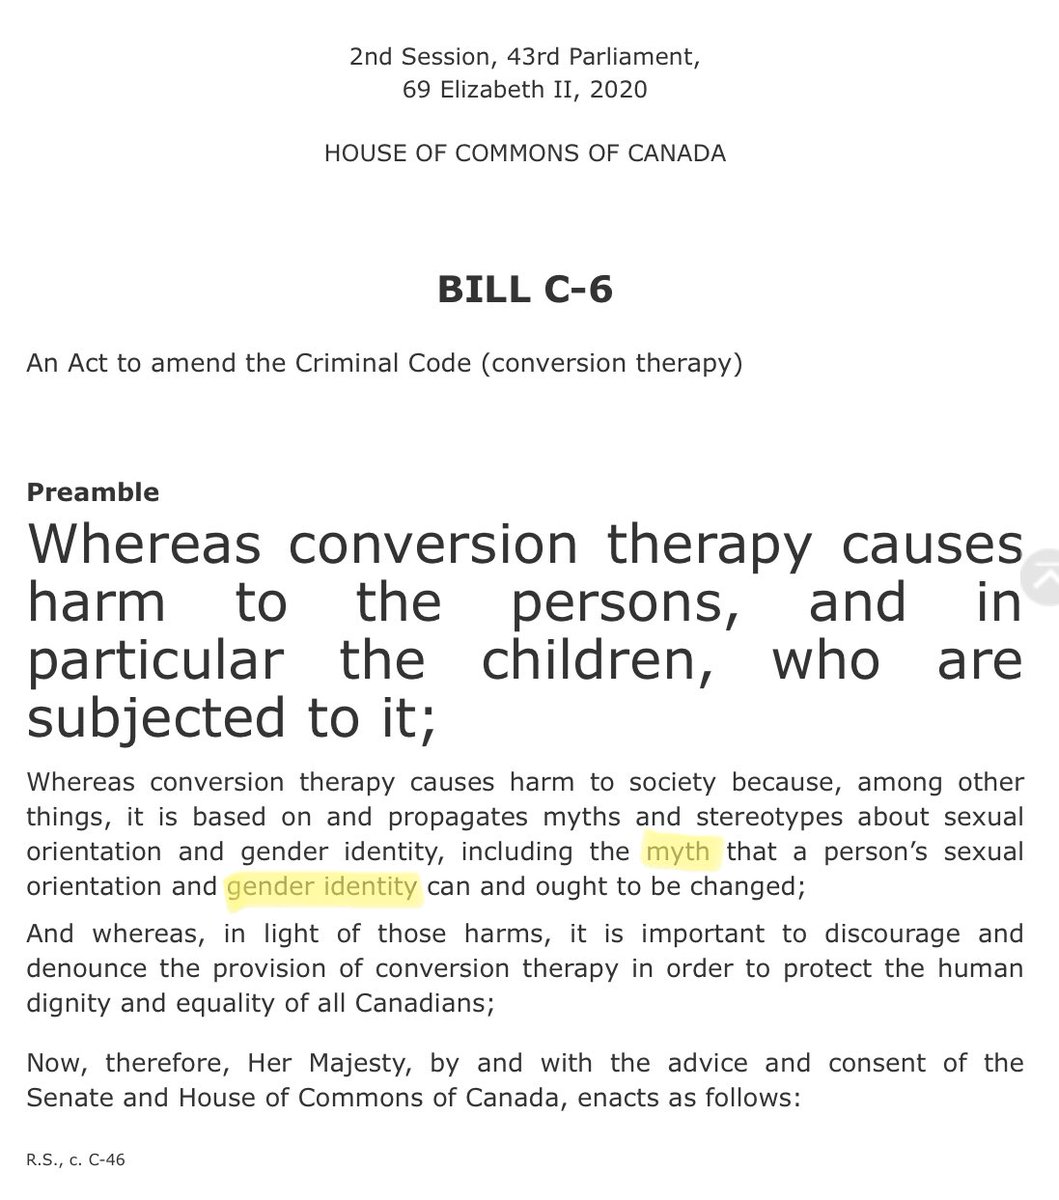 81.Except you don’t whisper such a thing.You write Bill C-6 which cements such a thing into law, and vote in favour of it 308 - 7.A Bill that is incredibly FACTUALLY FLAWED right from the outset. Gender Identity changes all the time. We are taught it is fluid. @RhealFortin